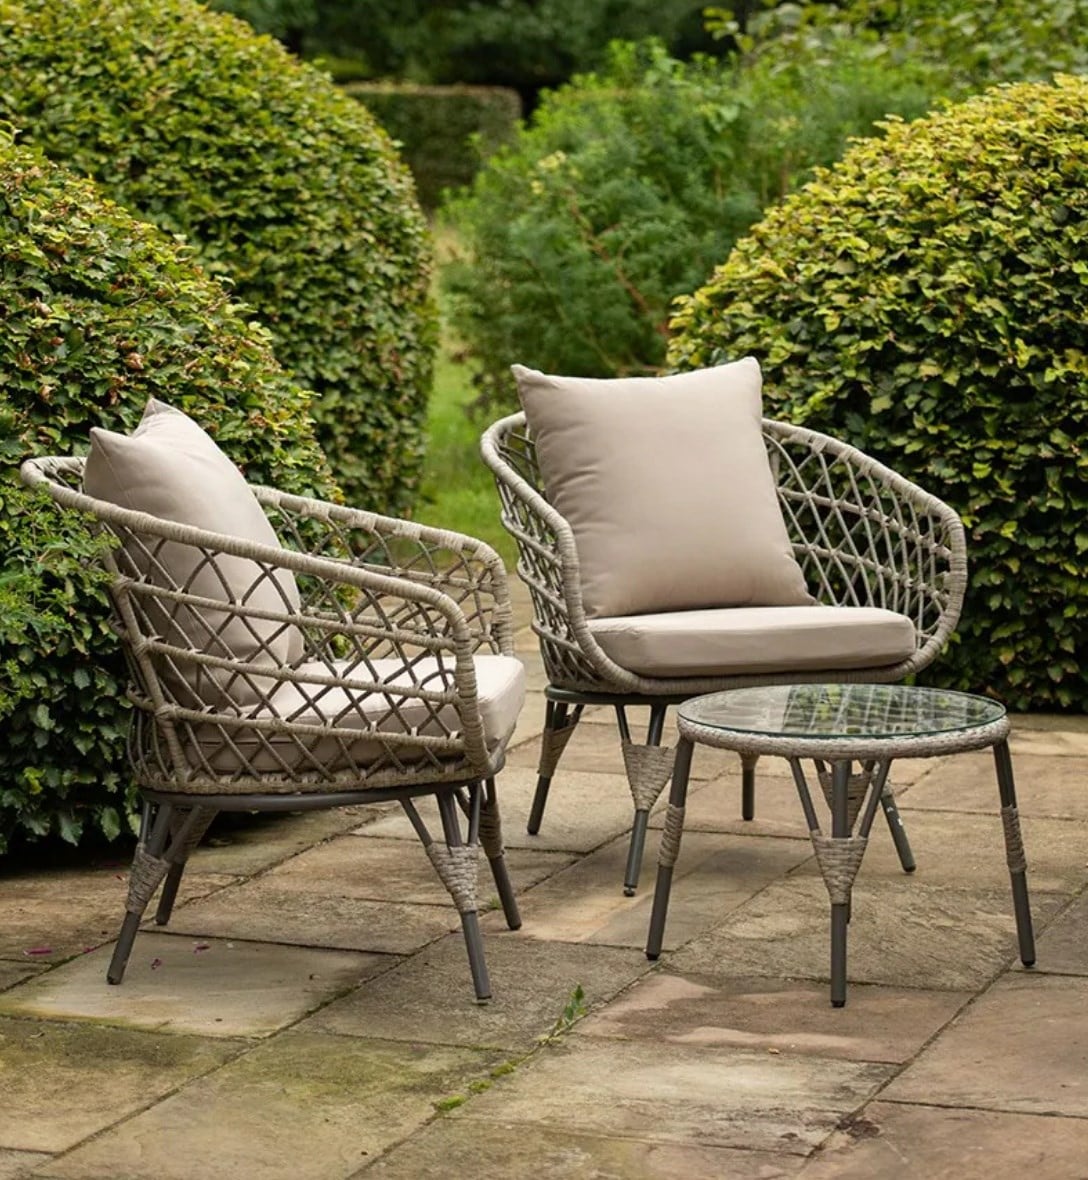 Garden chairs and loungers